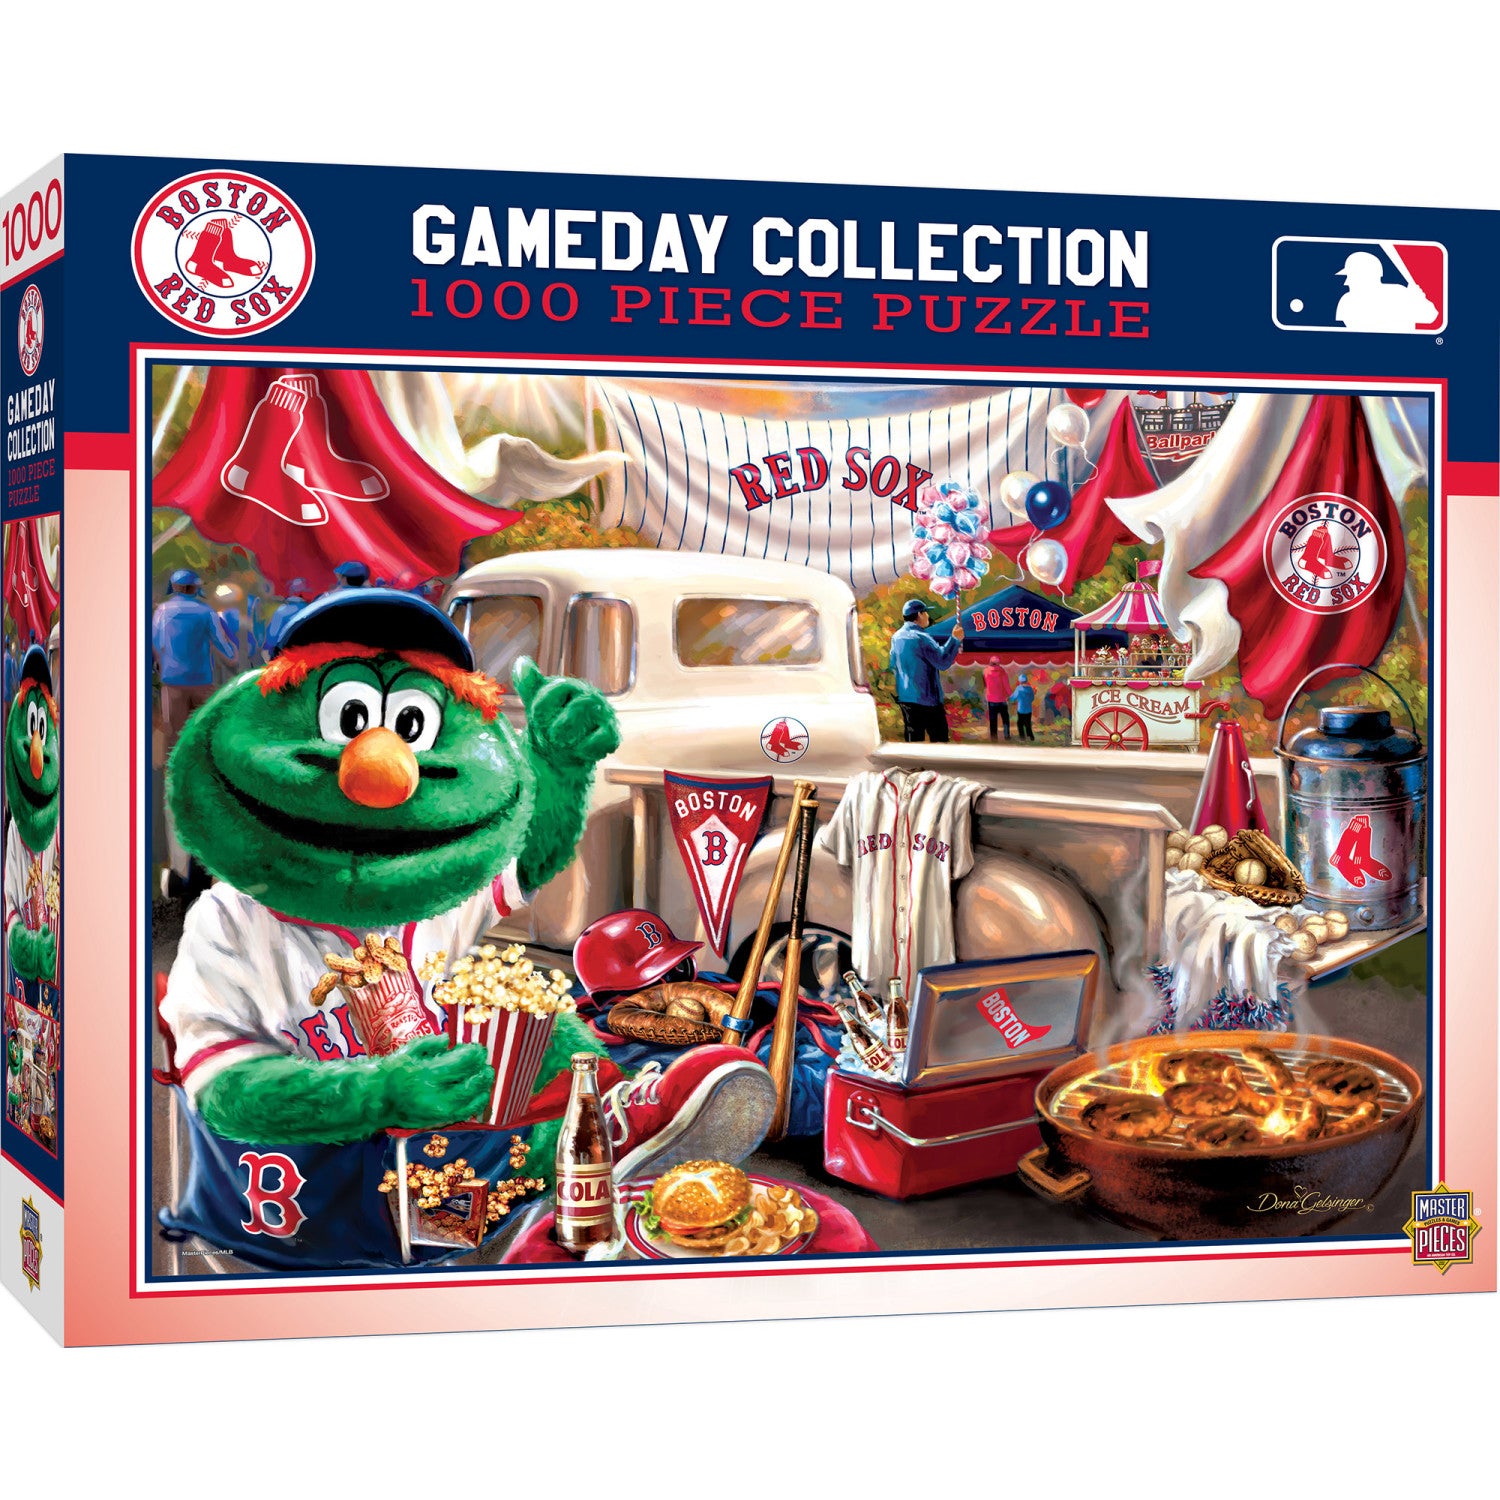 Boston Red Sox - Gameday 1000 Piece Puzzle